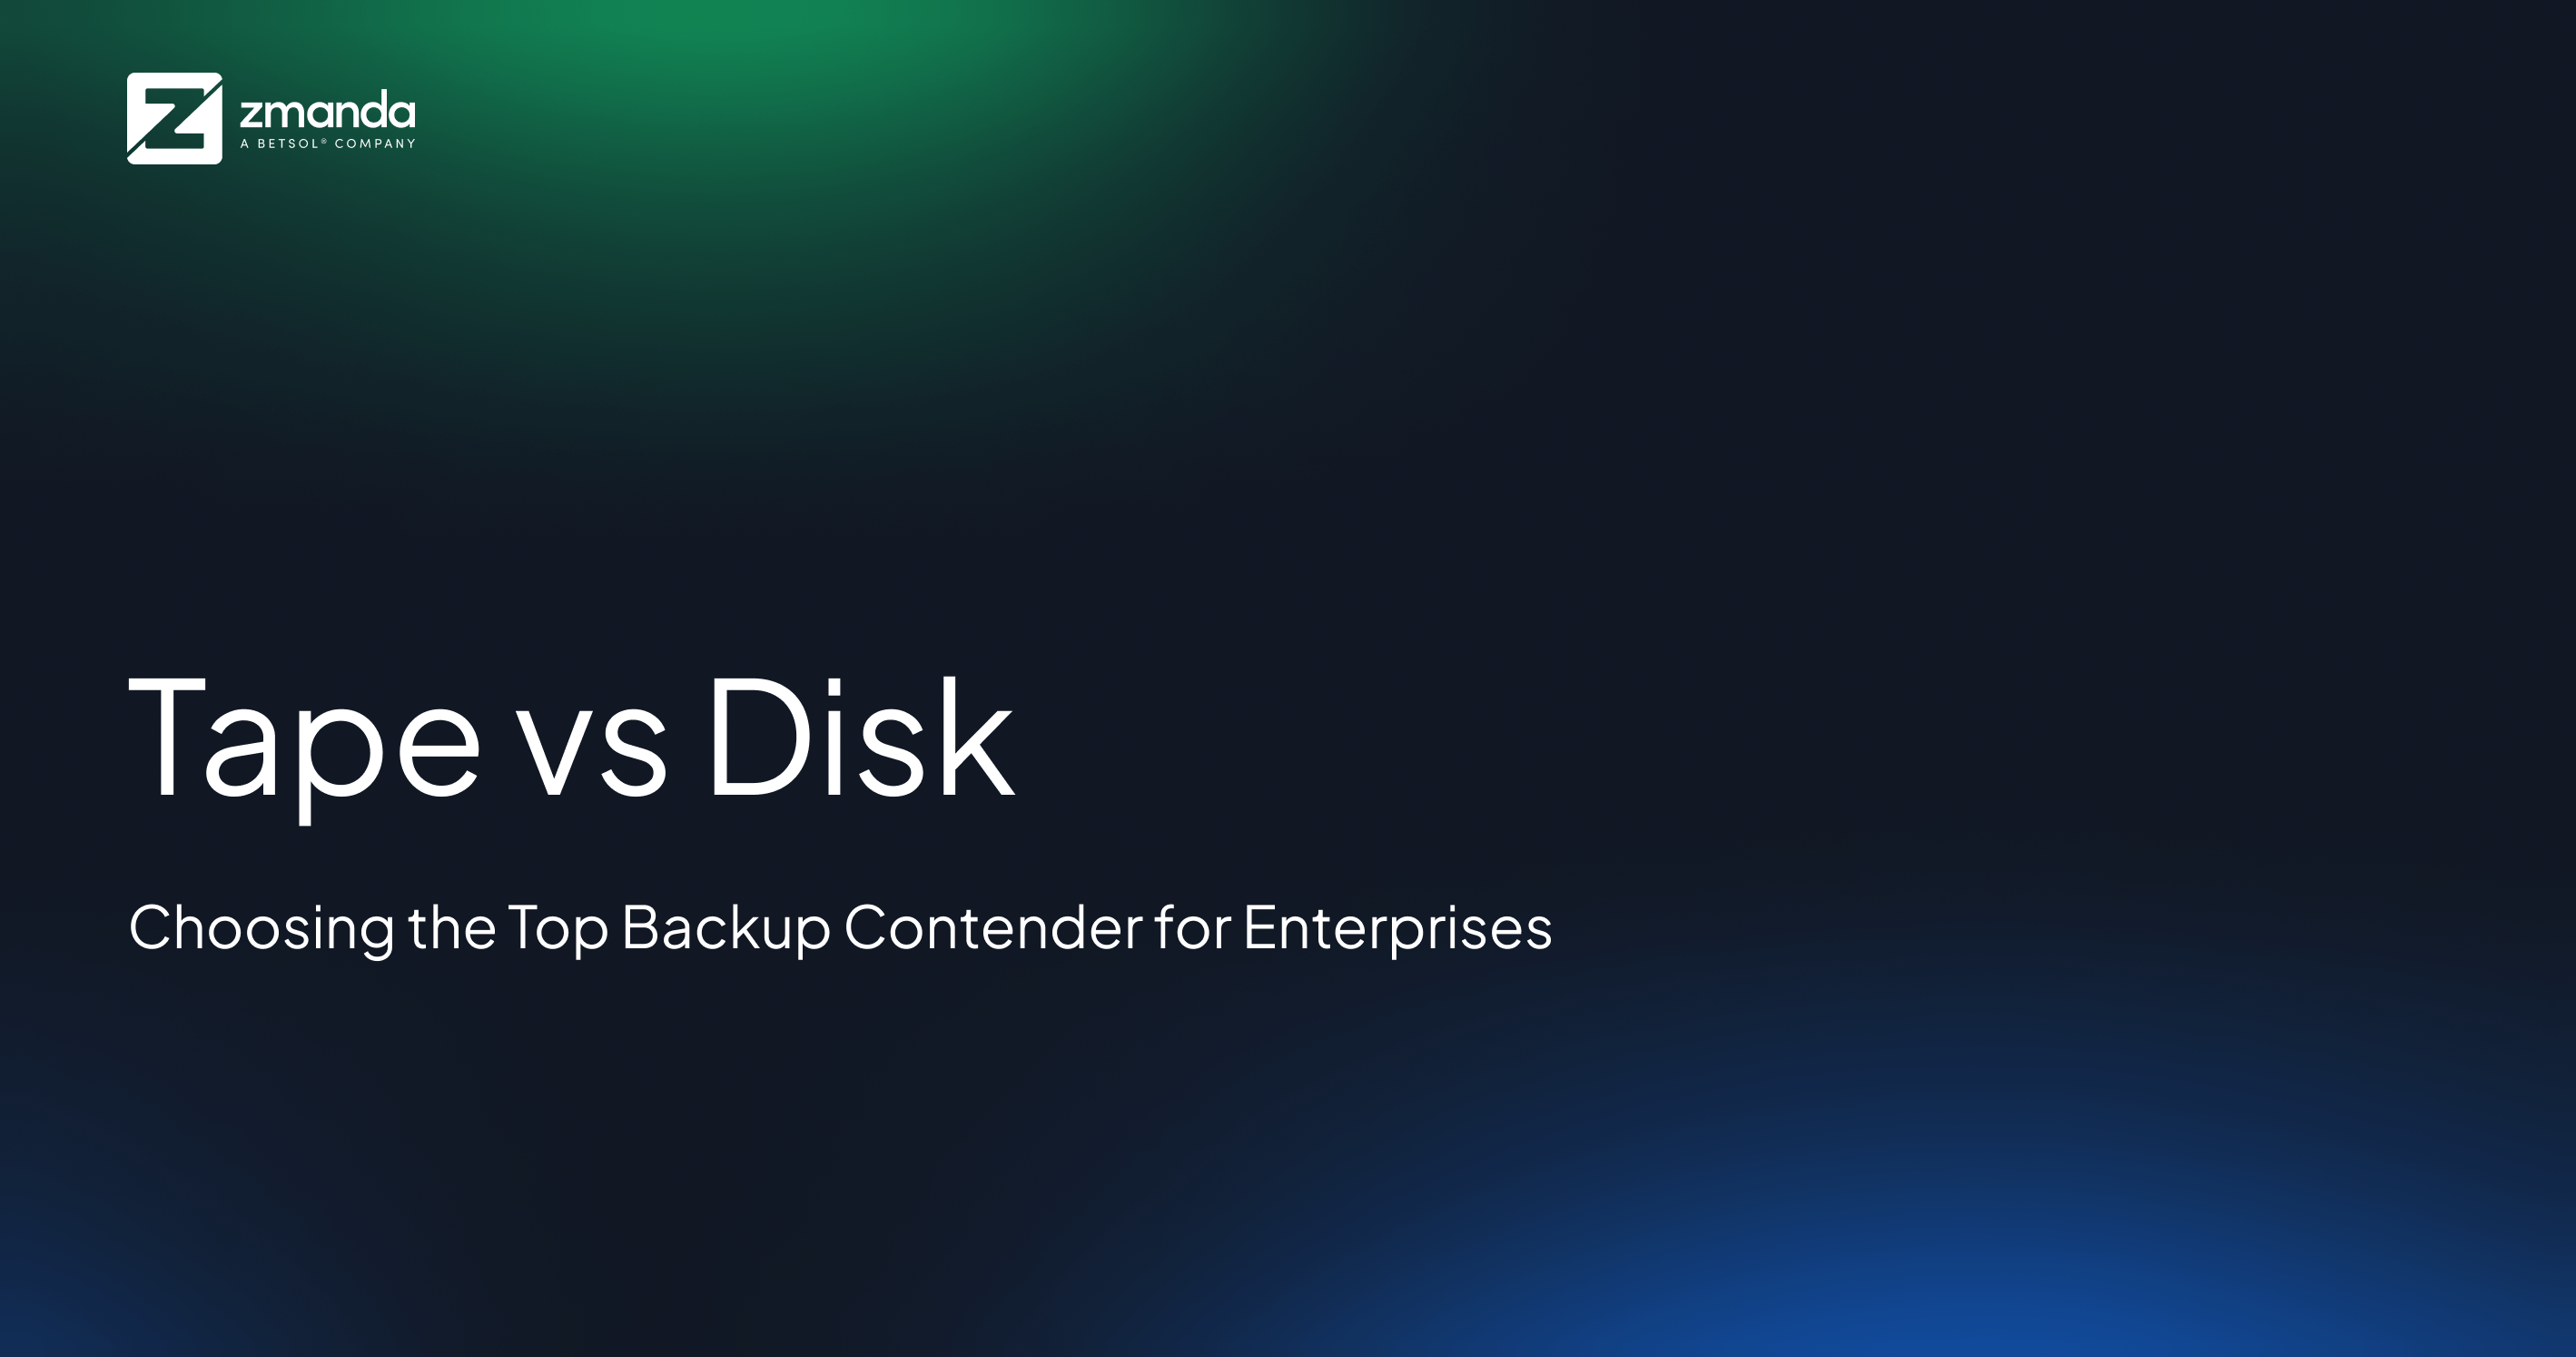 An image with text that says tape vs disk: Choosing the Top Backup Contender for Enterprises